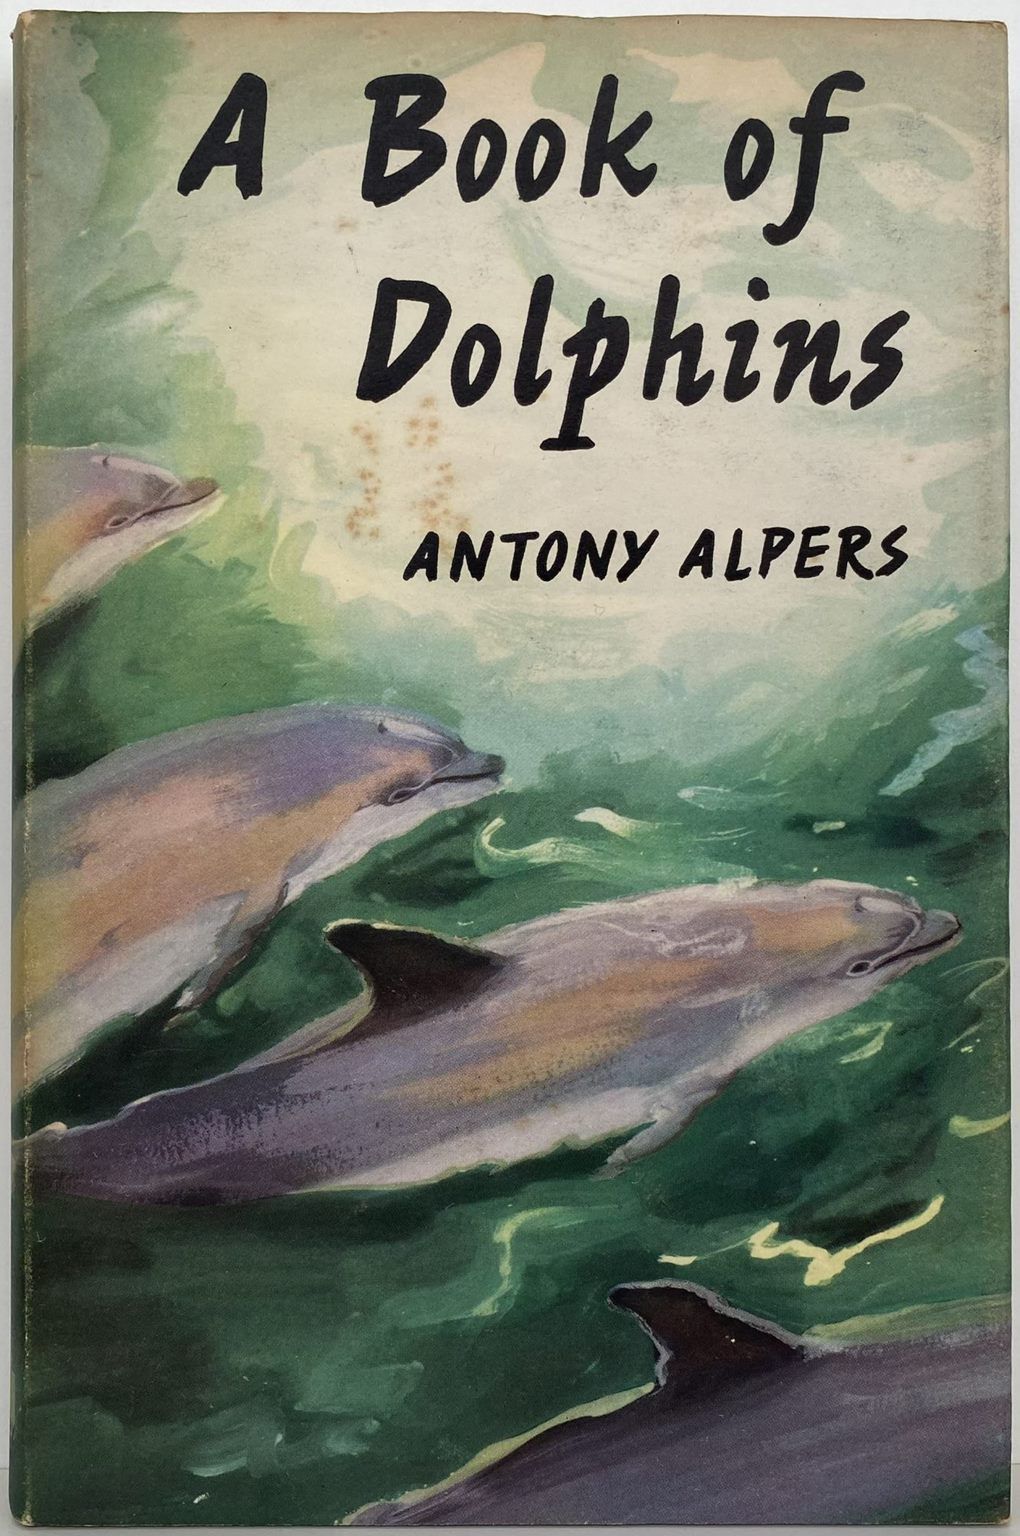 A BOOK OF DOLPHINS